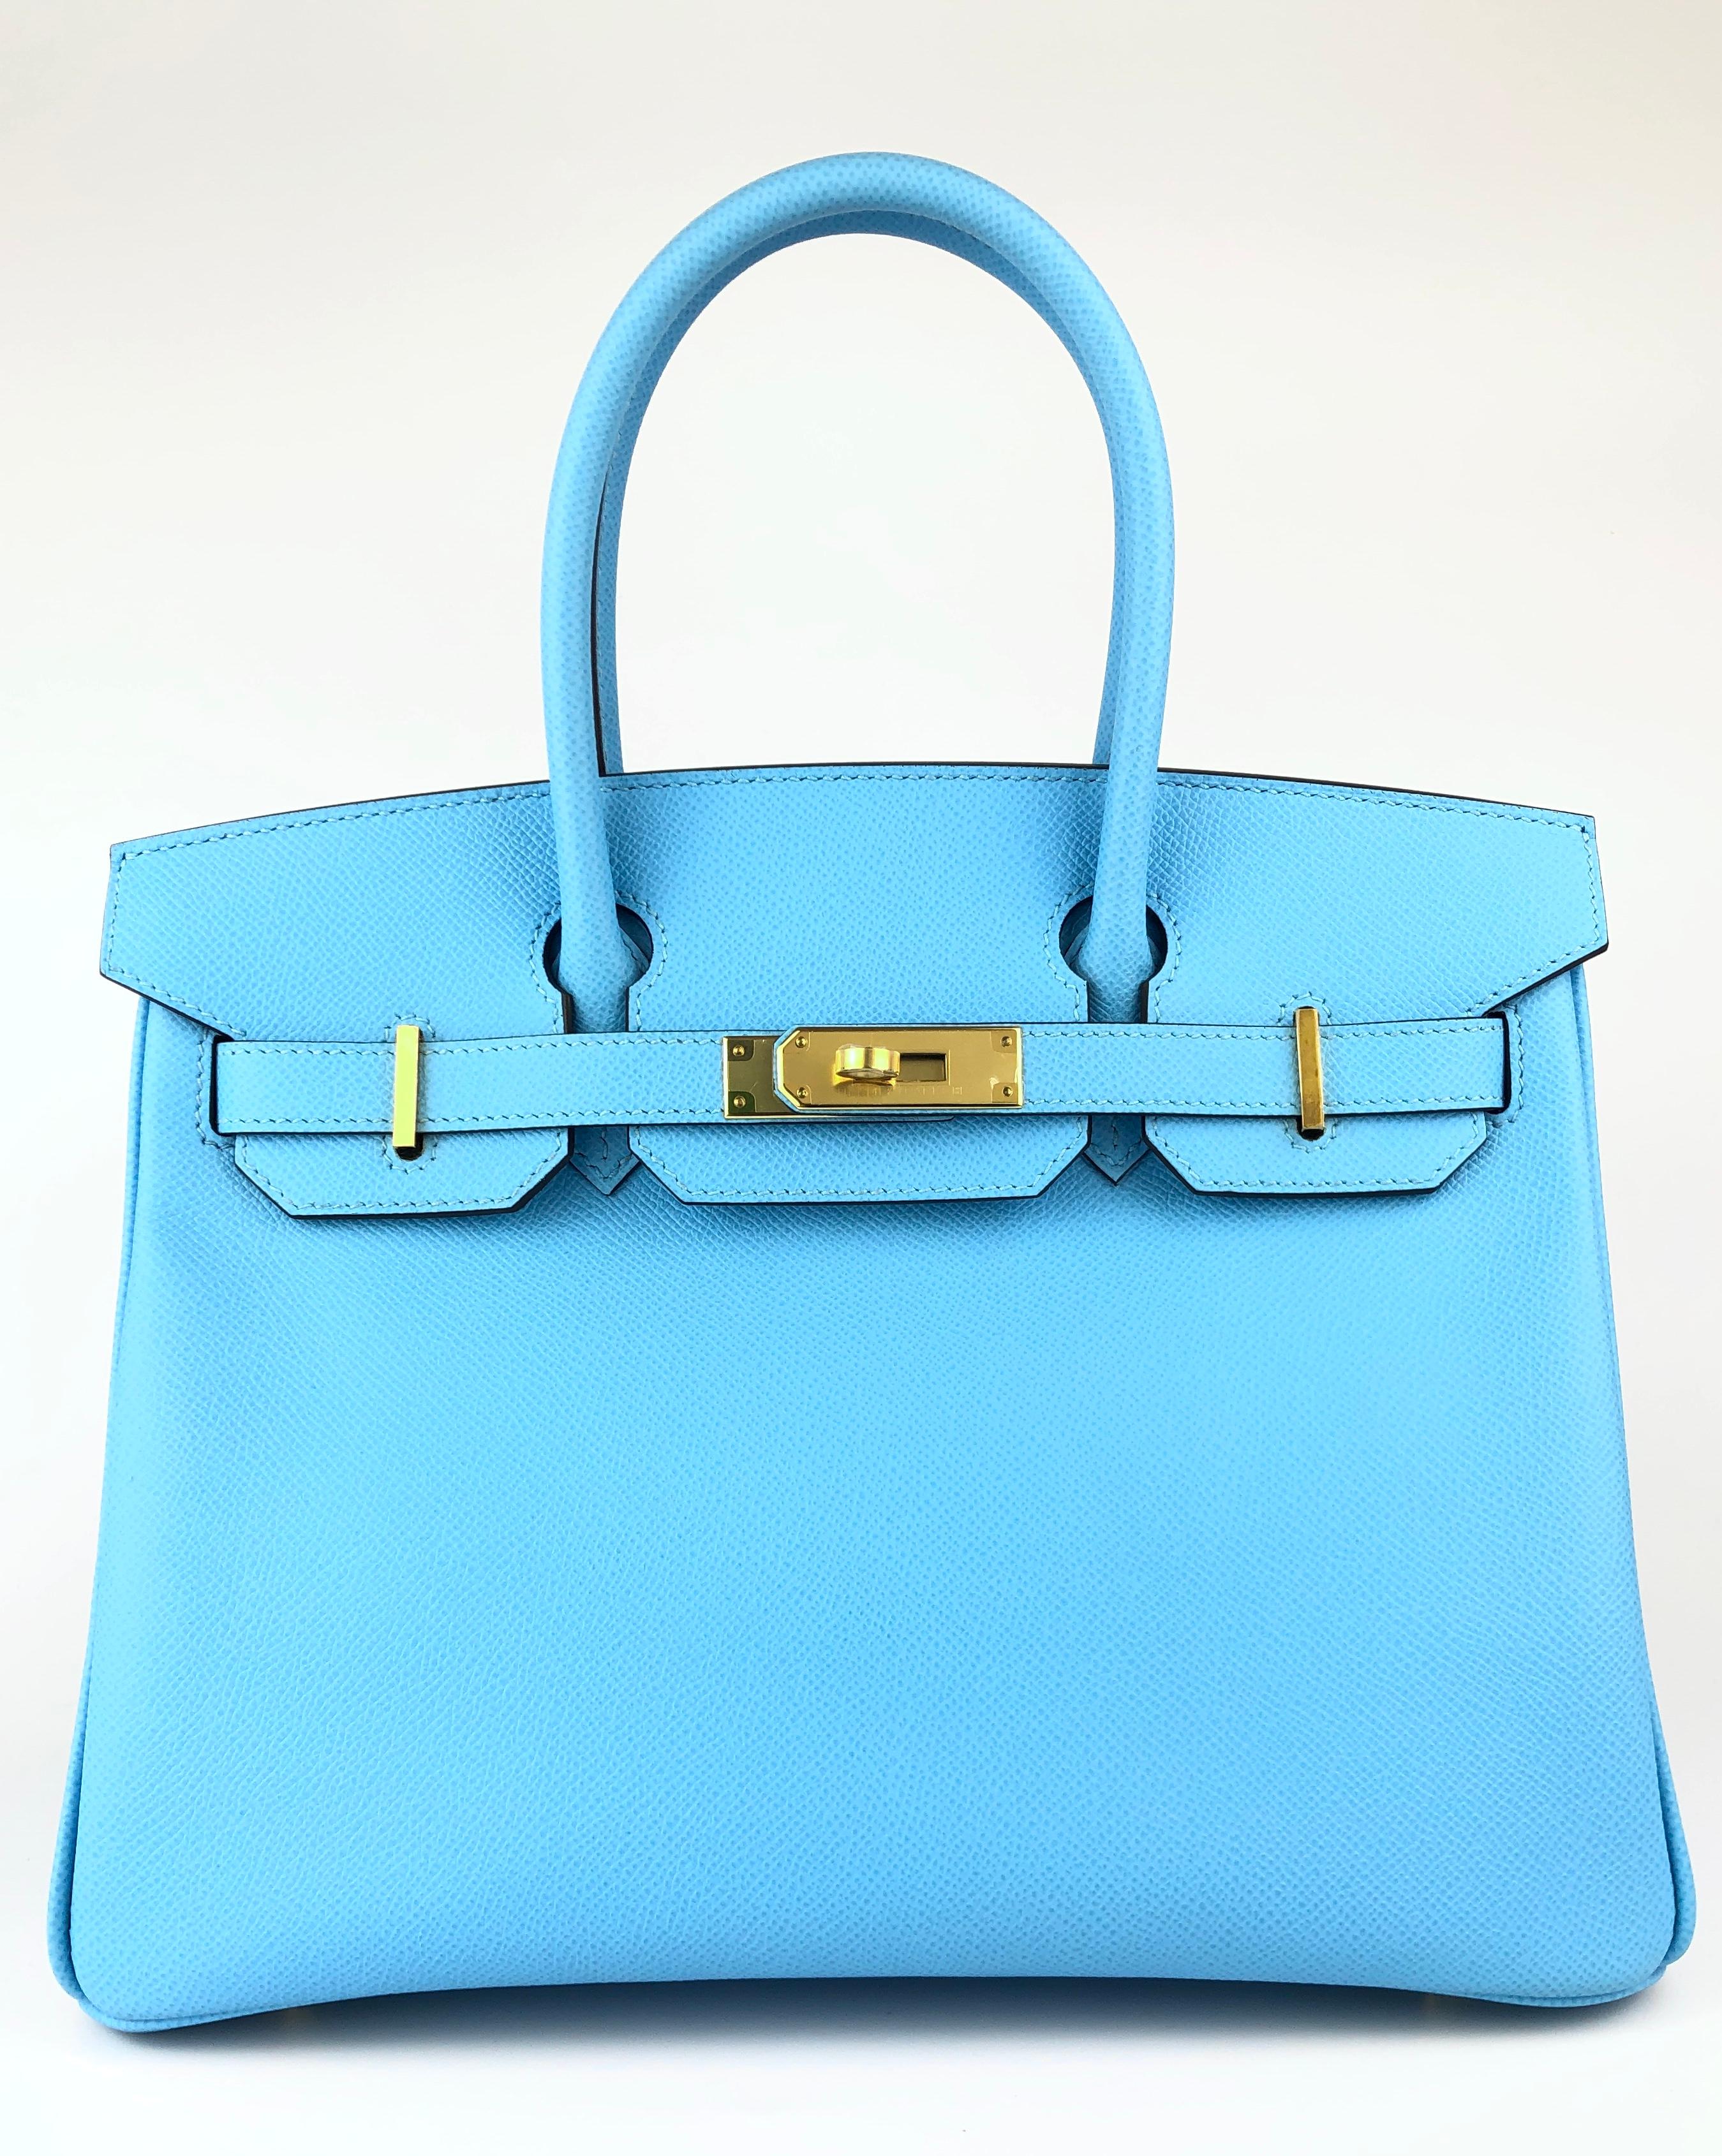 Rare AS NEW 2020 Hermes Birkin 30 Blue Celeste Epsom Leather Complimented by Gold Hardware. Y Stamp 2020. Includes all Accessories and box.

Shop with Confidence from Lux Addicts. Authenticity Guaranteed!